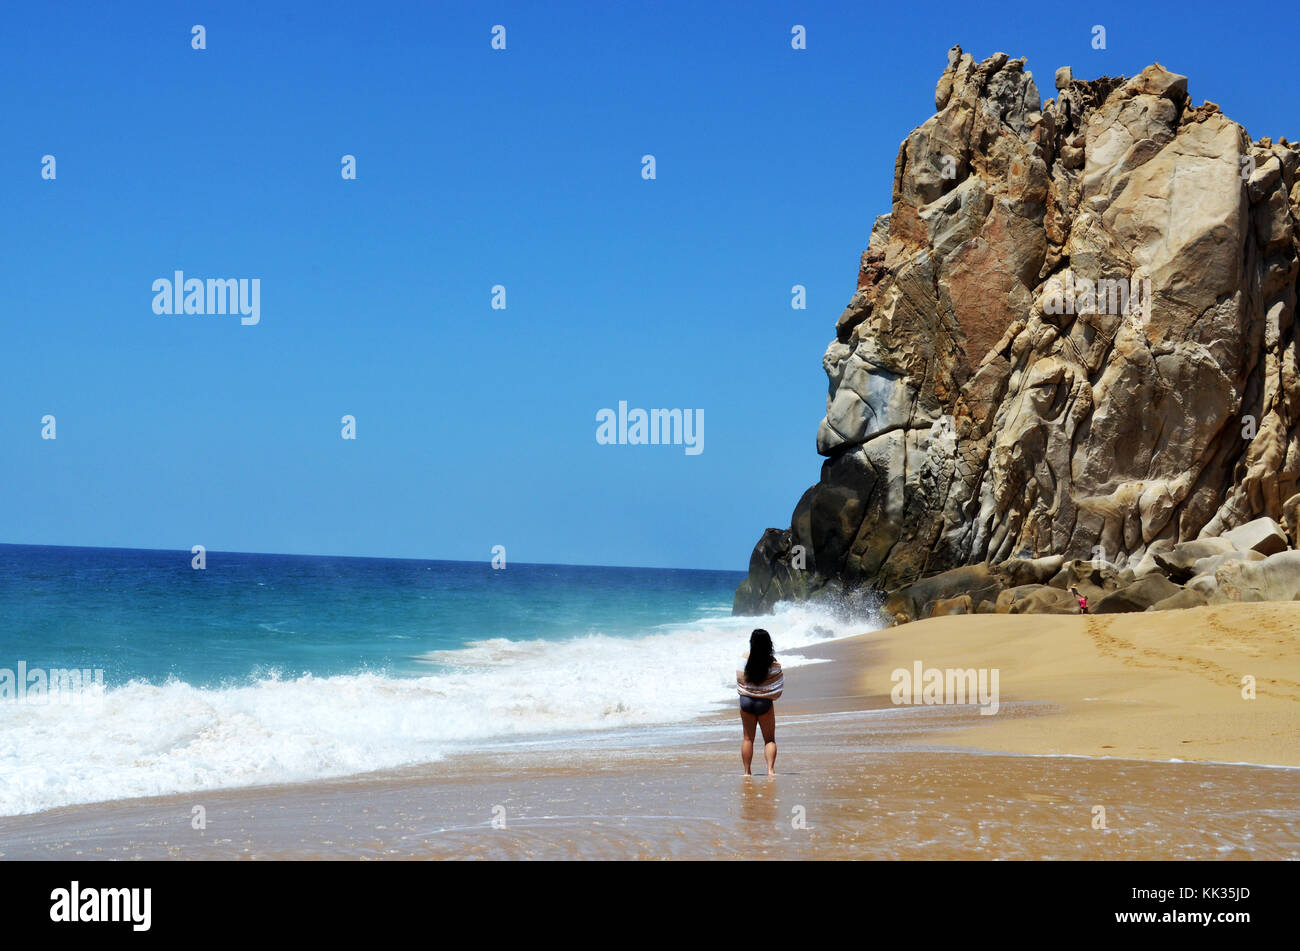 Cabo San Lucas also known as Los Cabos.  A city at the southern tip of Baja California Peninsula in Mexico. Stock Photo